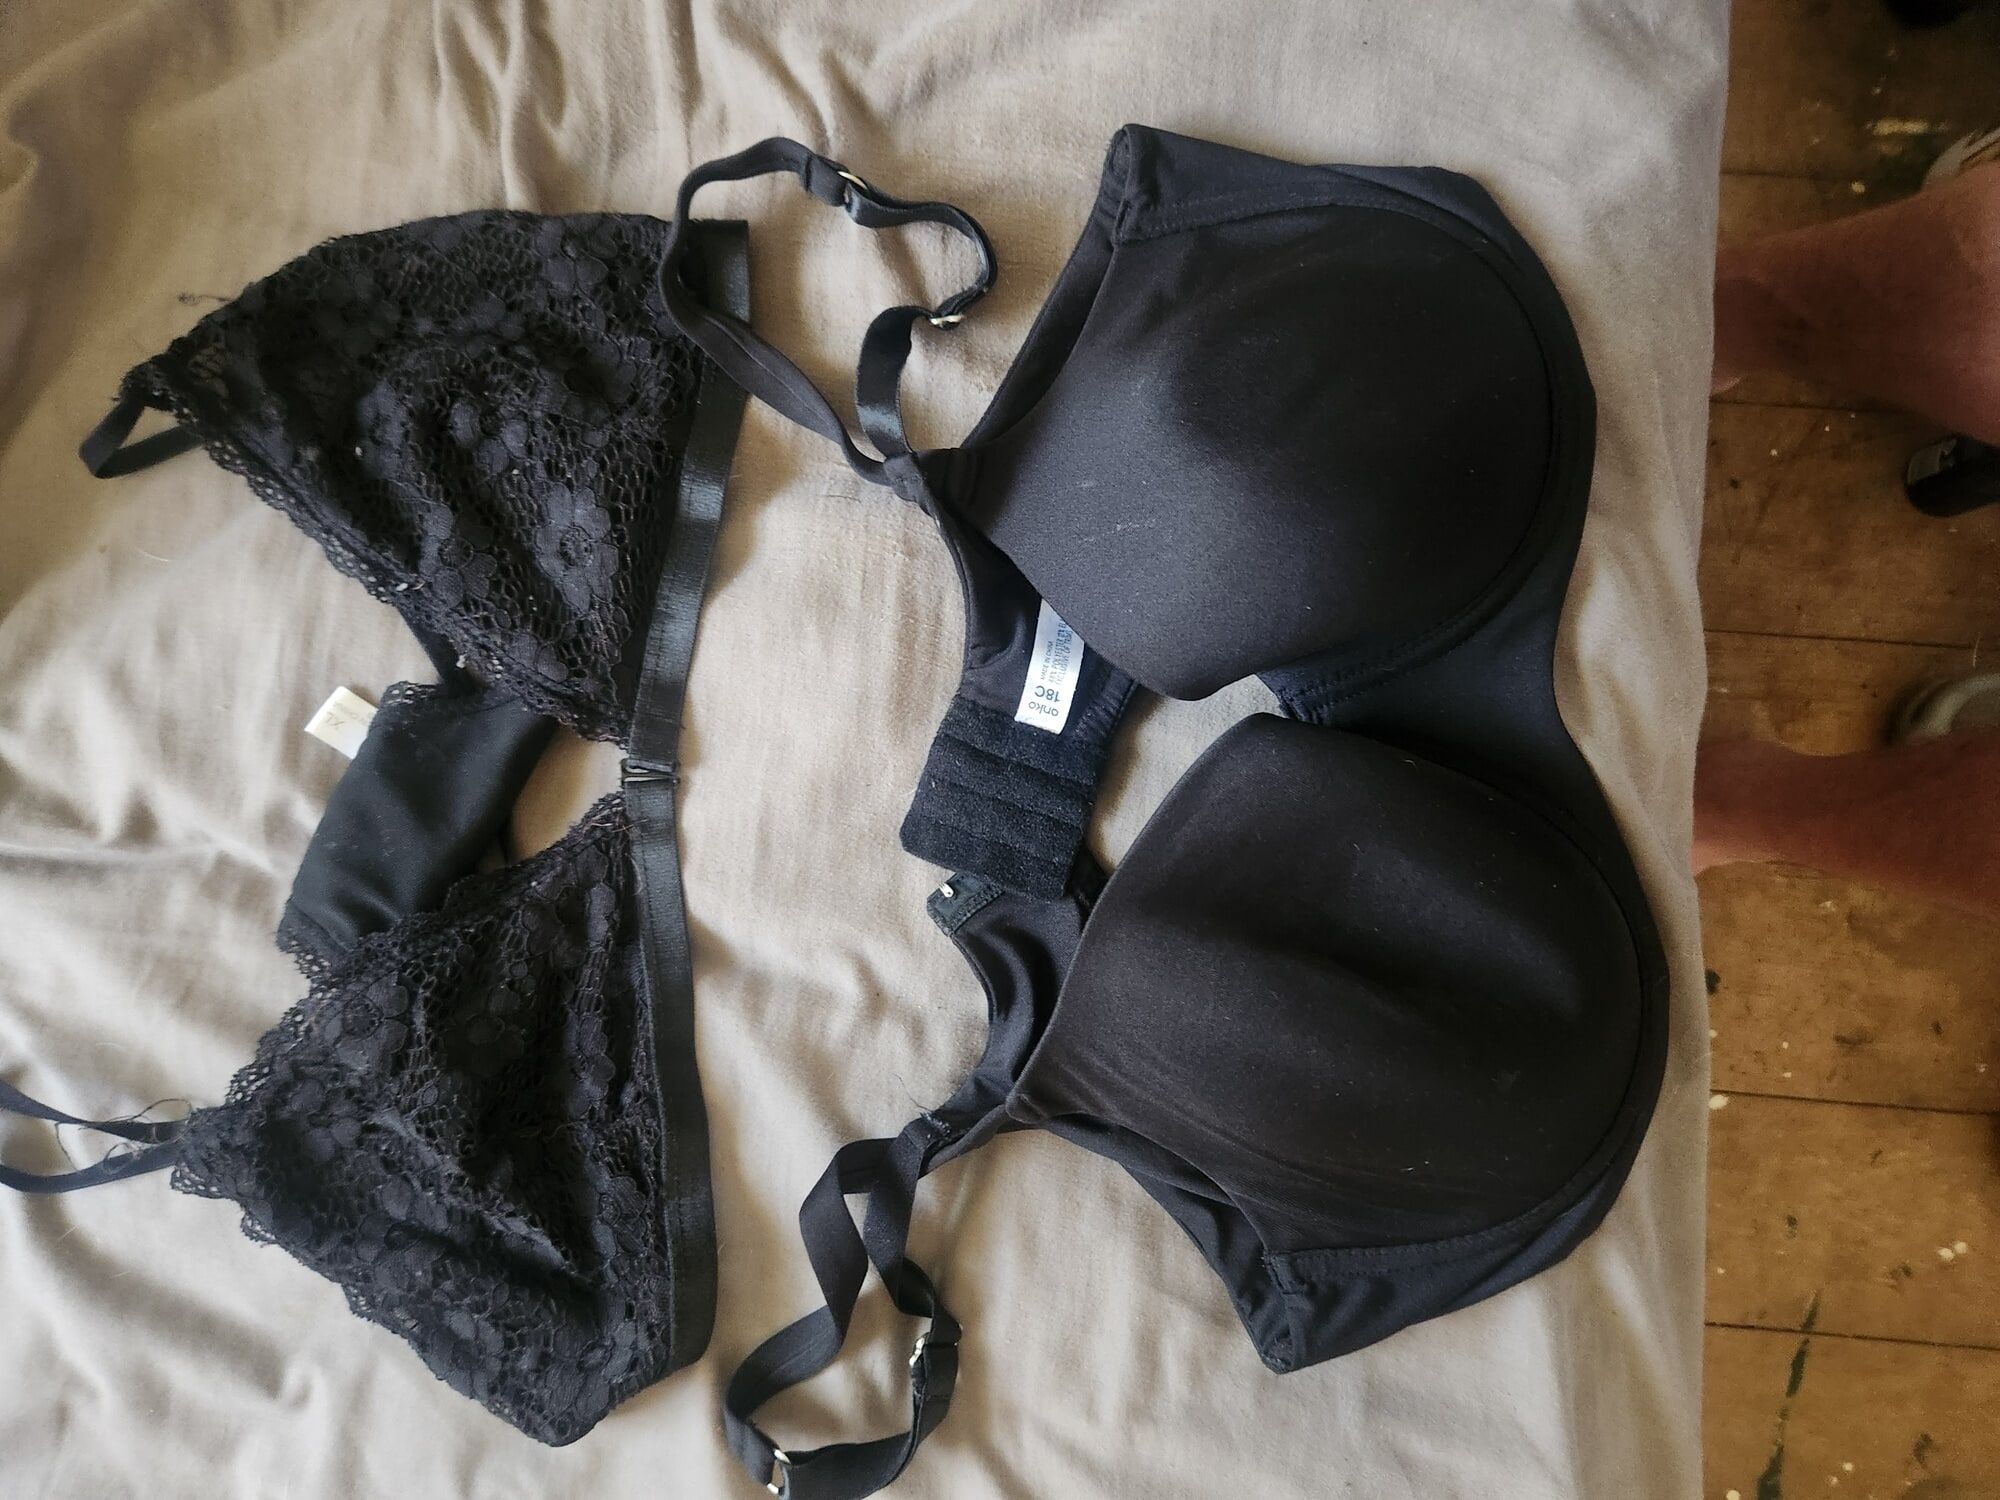 Some of my sexy underwear and bras #4